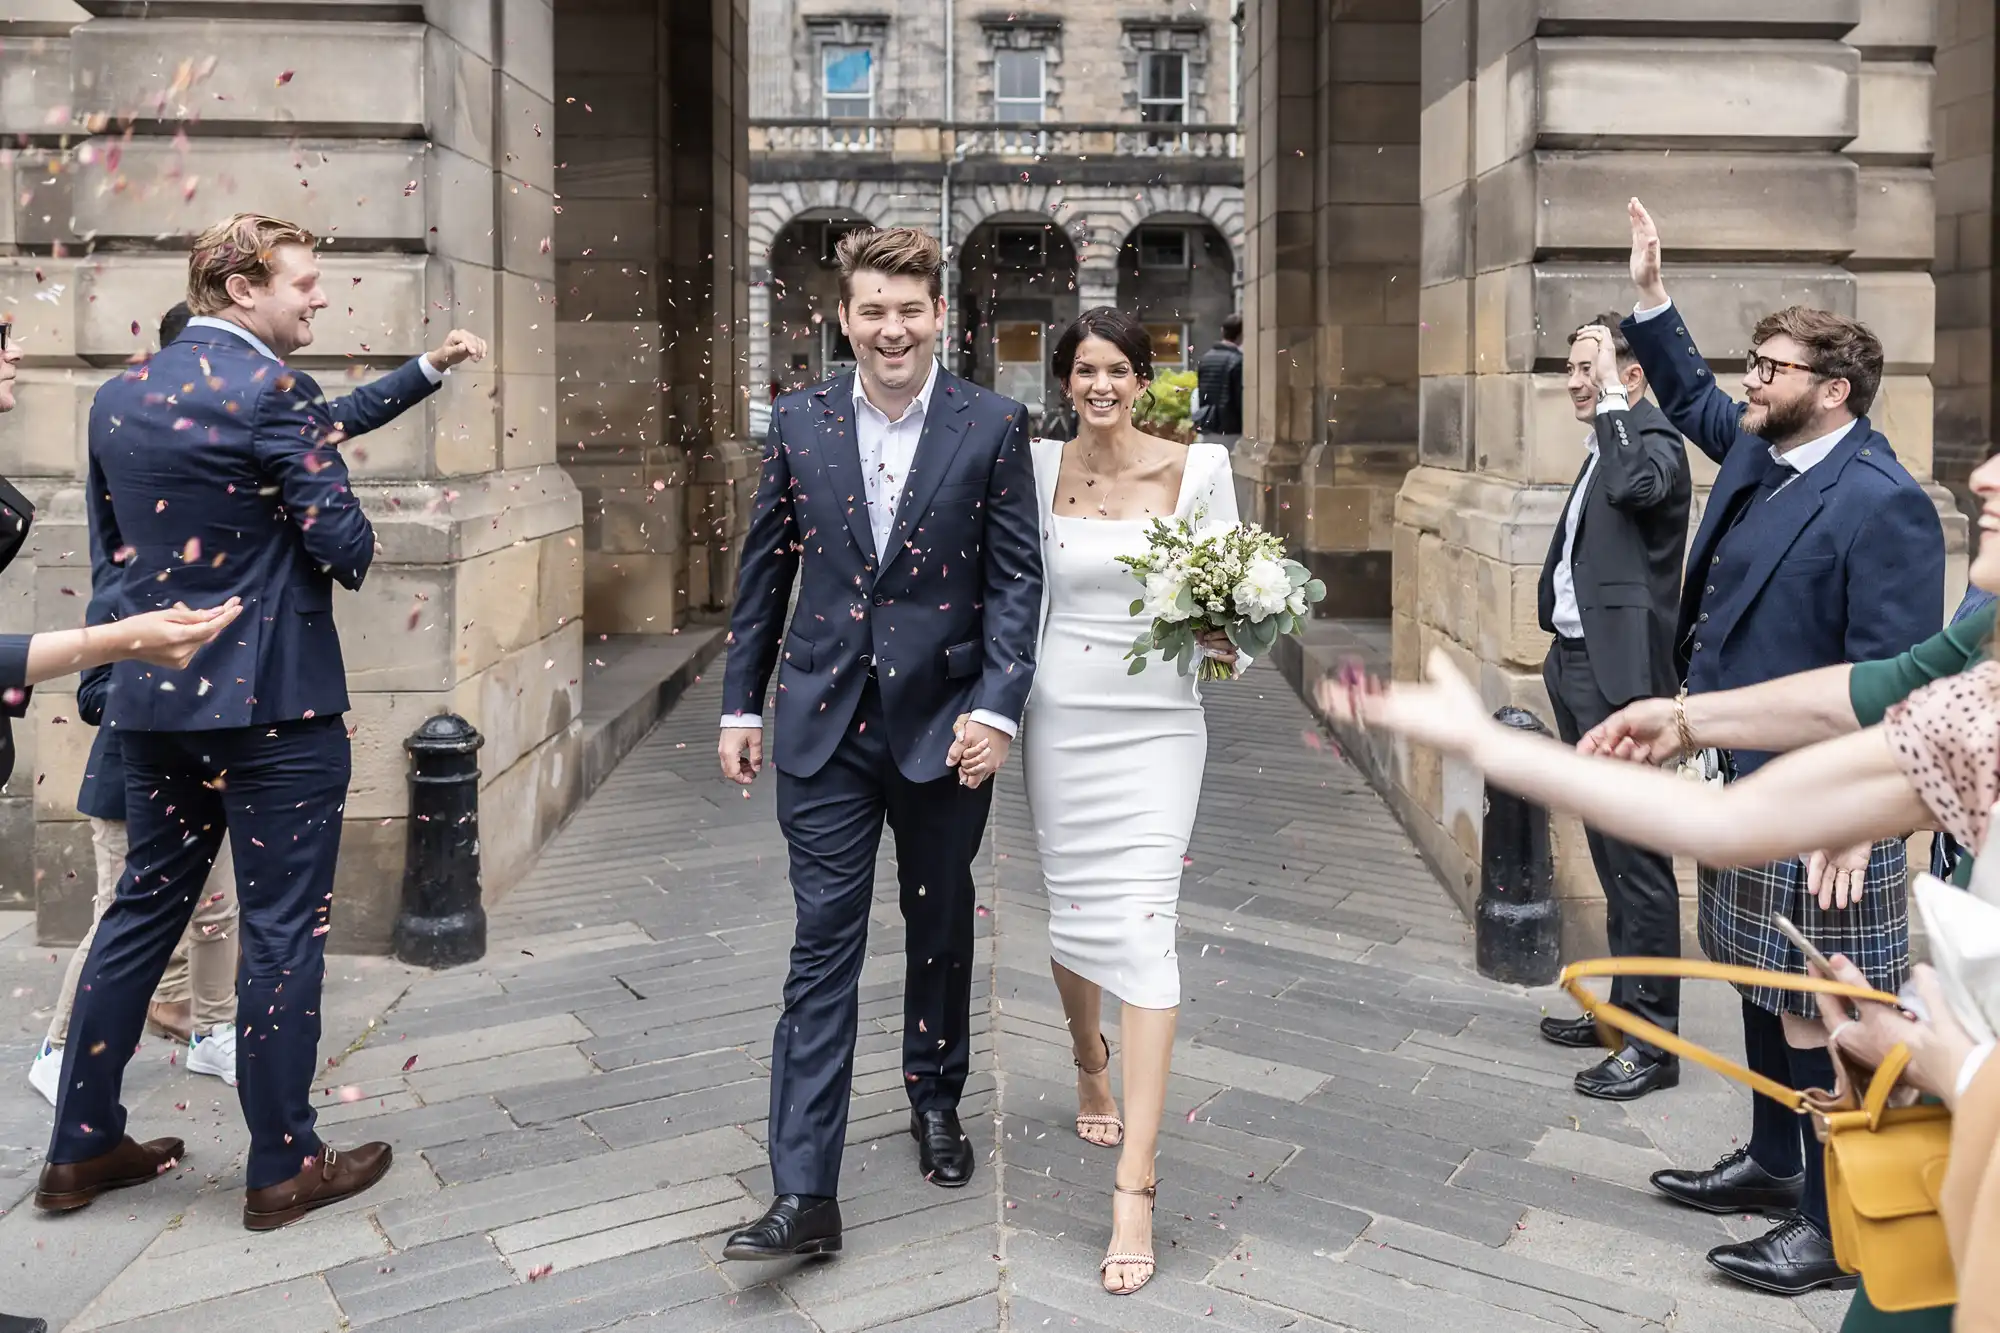 A newlywed couple walking joyfully through a crowd as guests throw confetti, celebrating outside a stone building.